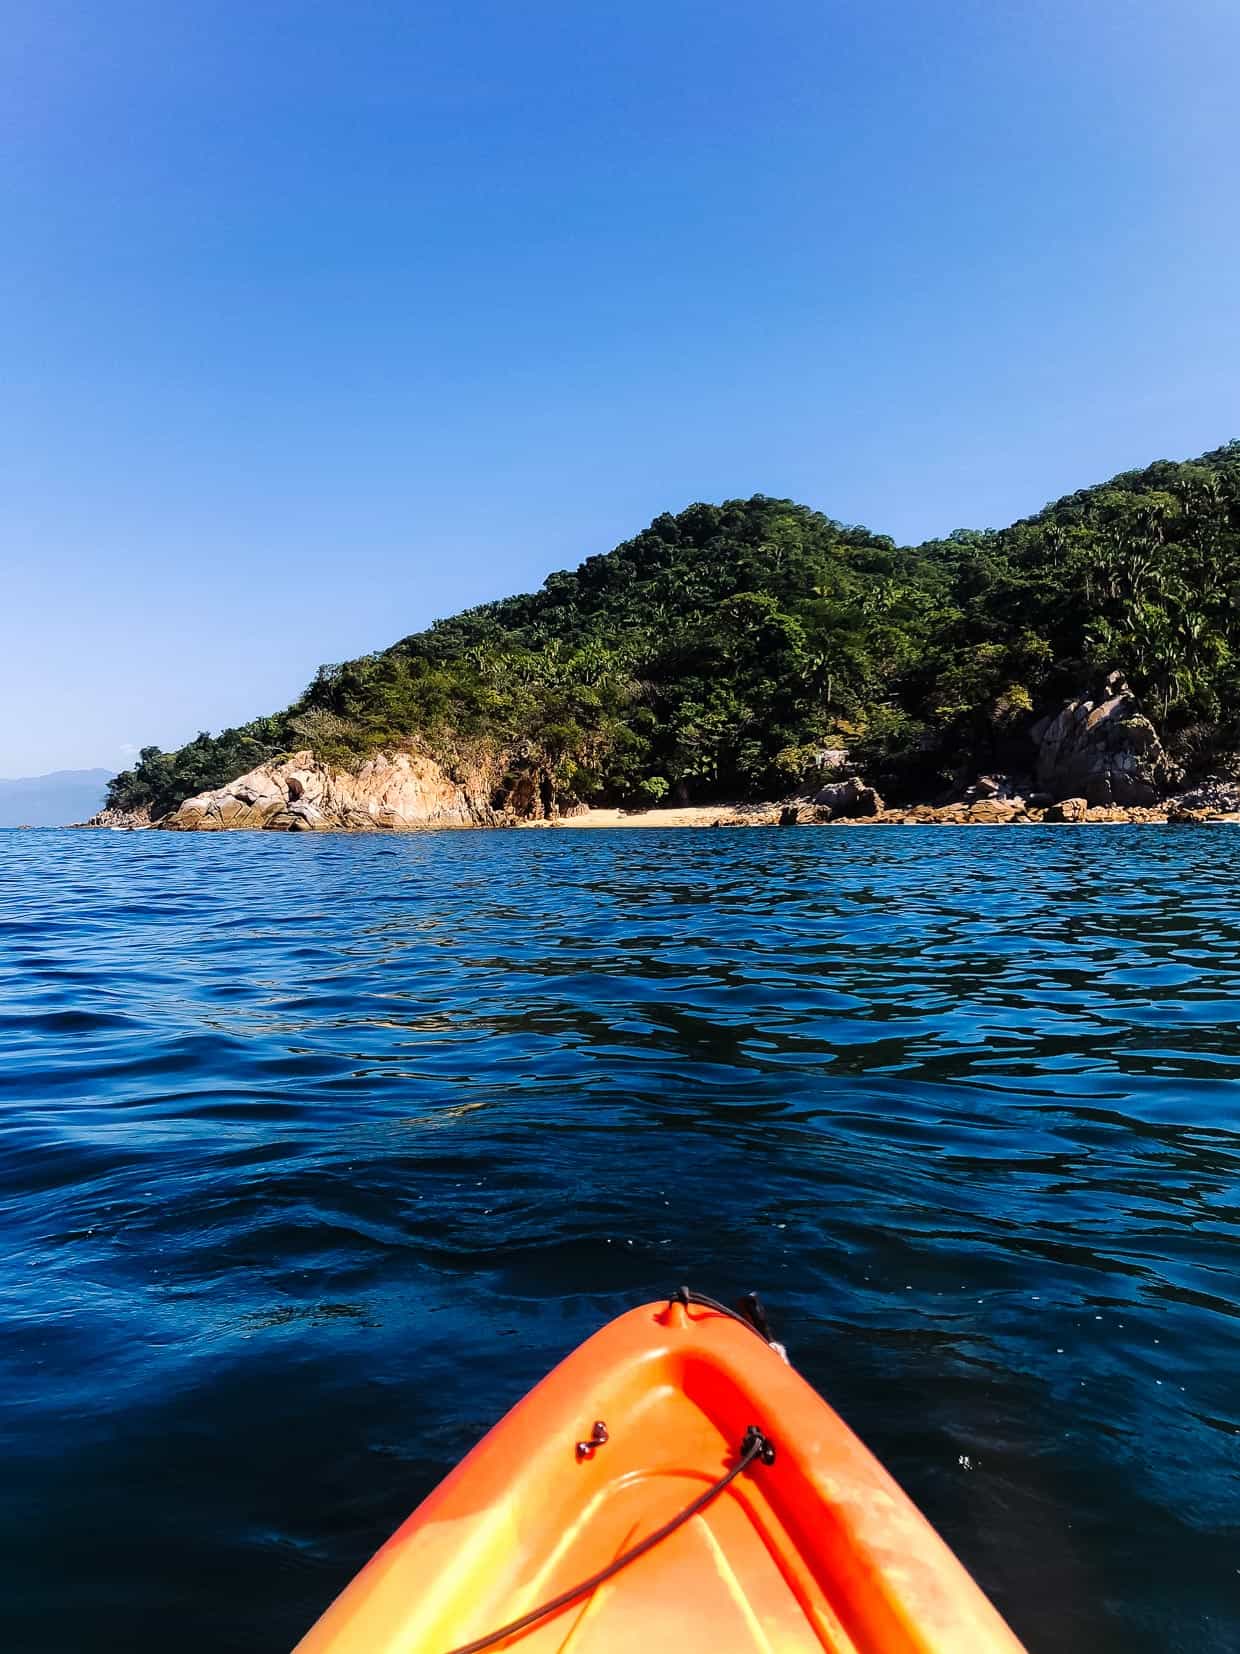 Kayaking in Majahuitas is one of many excursions in Mexico with Princess Cruises.